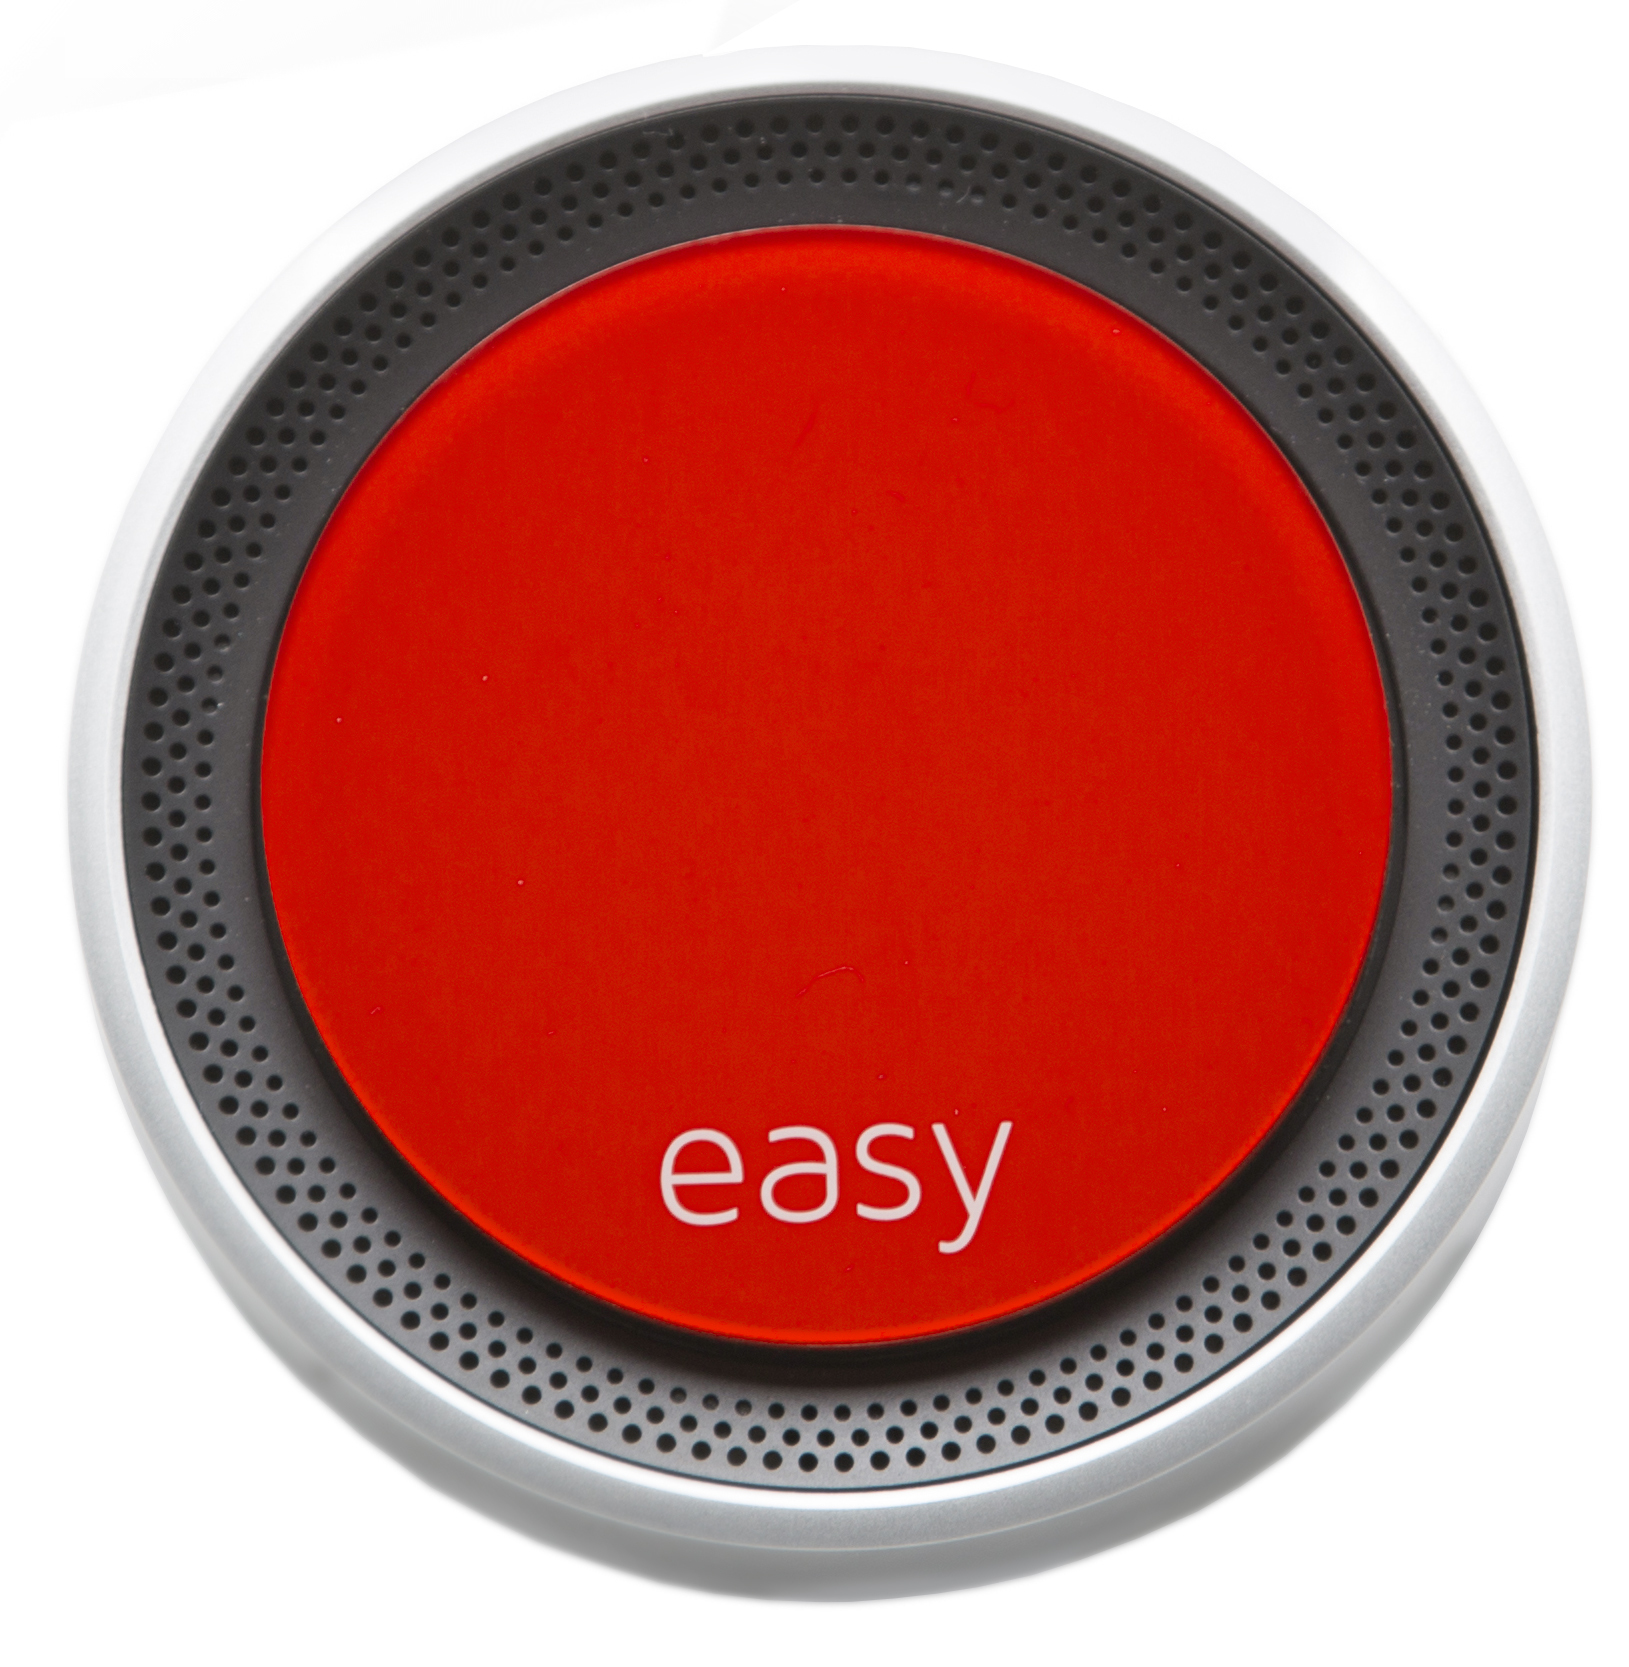 Staples Talking That Was Easy Button for sale online